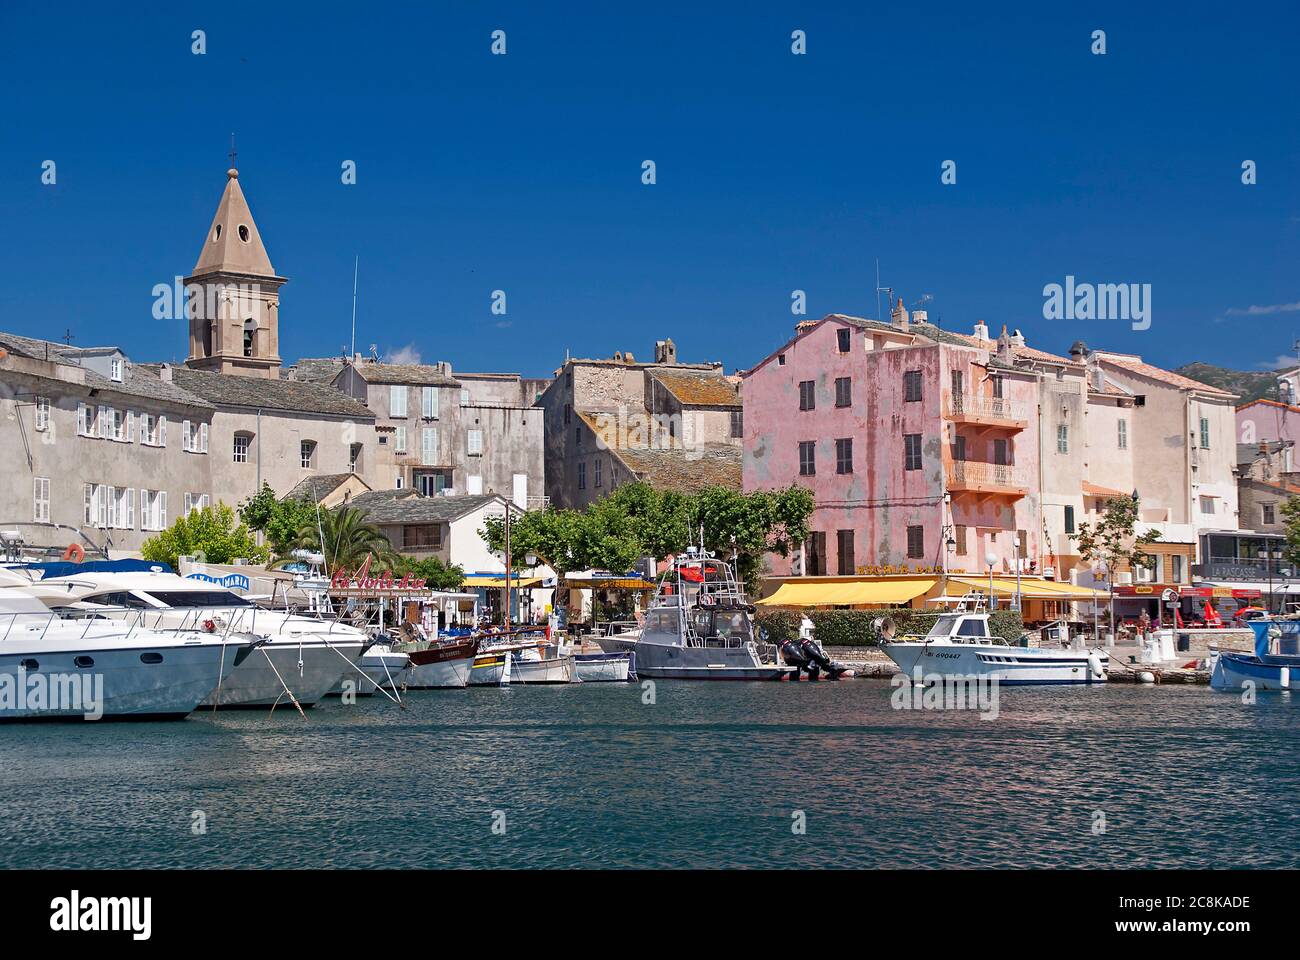 St Florent in Corsica: the town and harbour Stock Photo